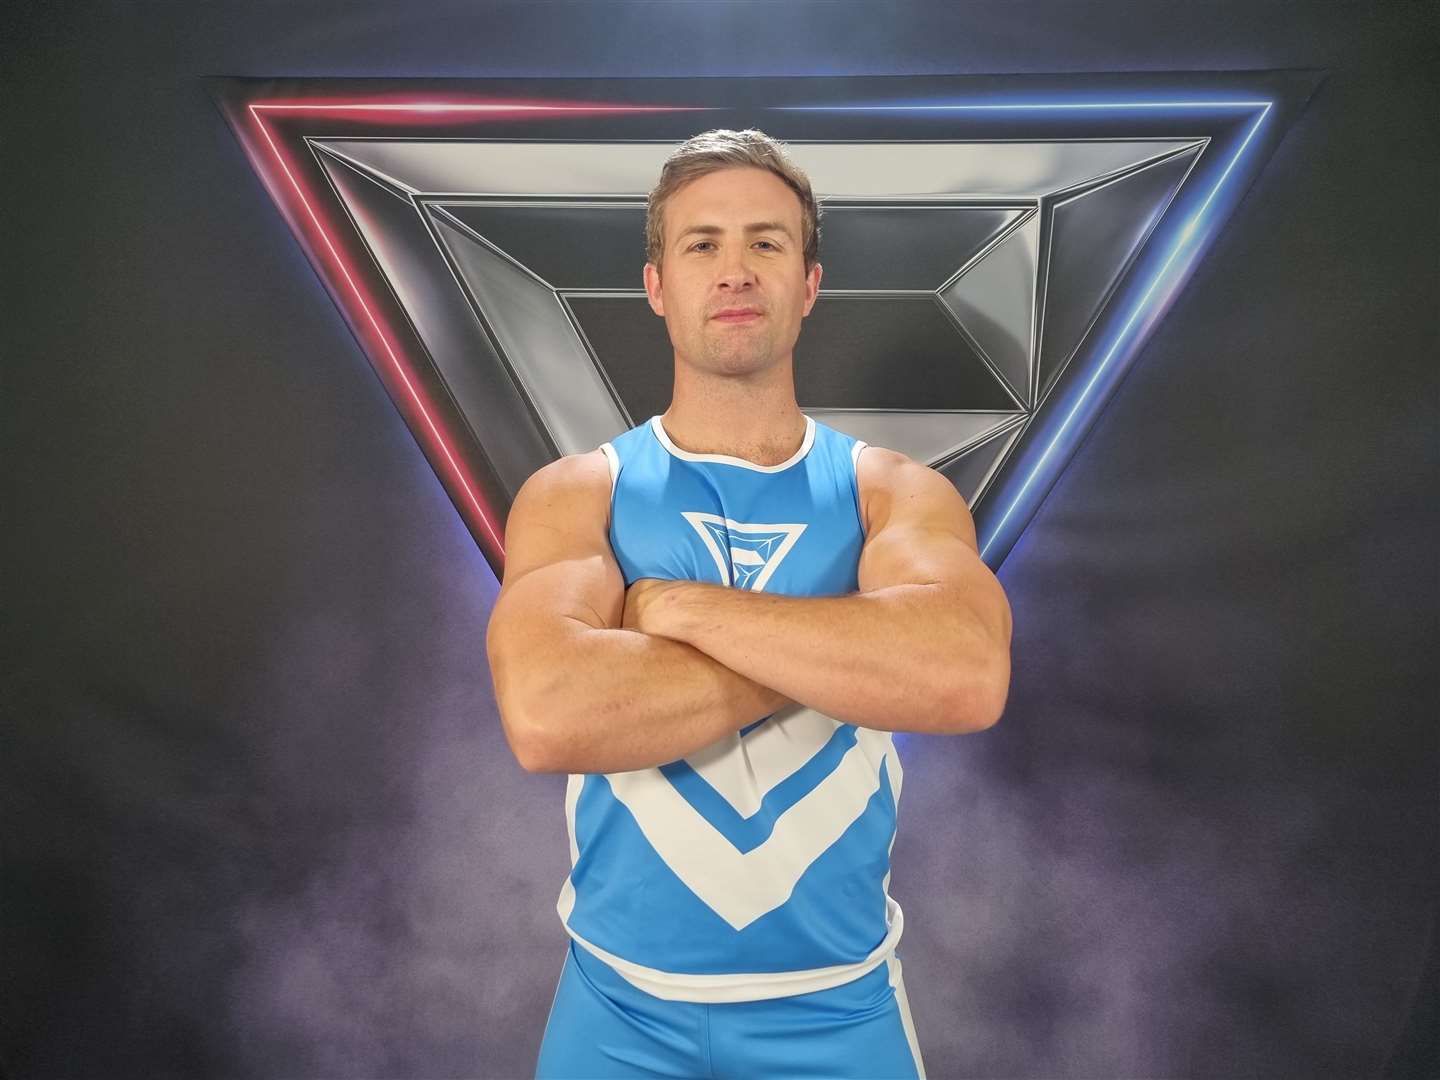 Finlay Anderson was a contestant on the Gladiators programme last Saturday